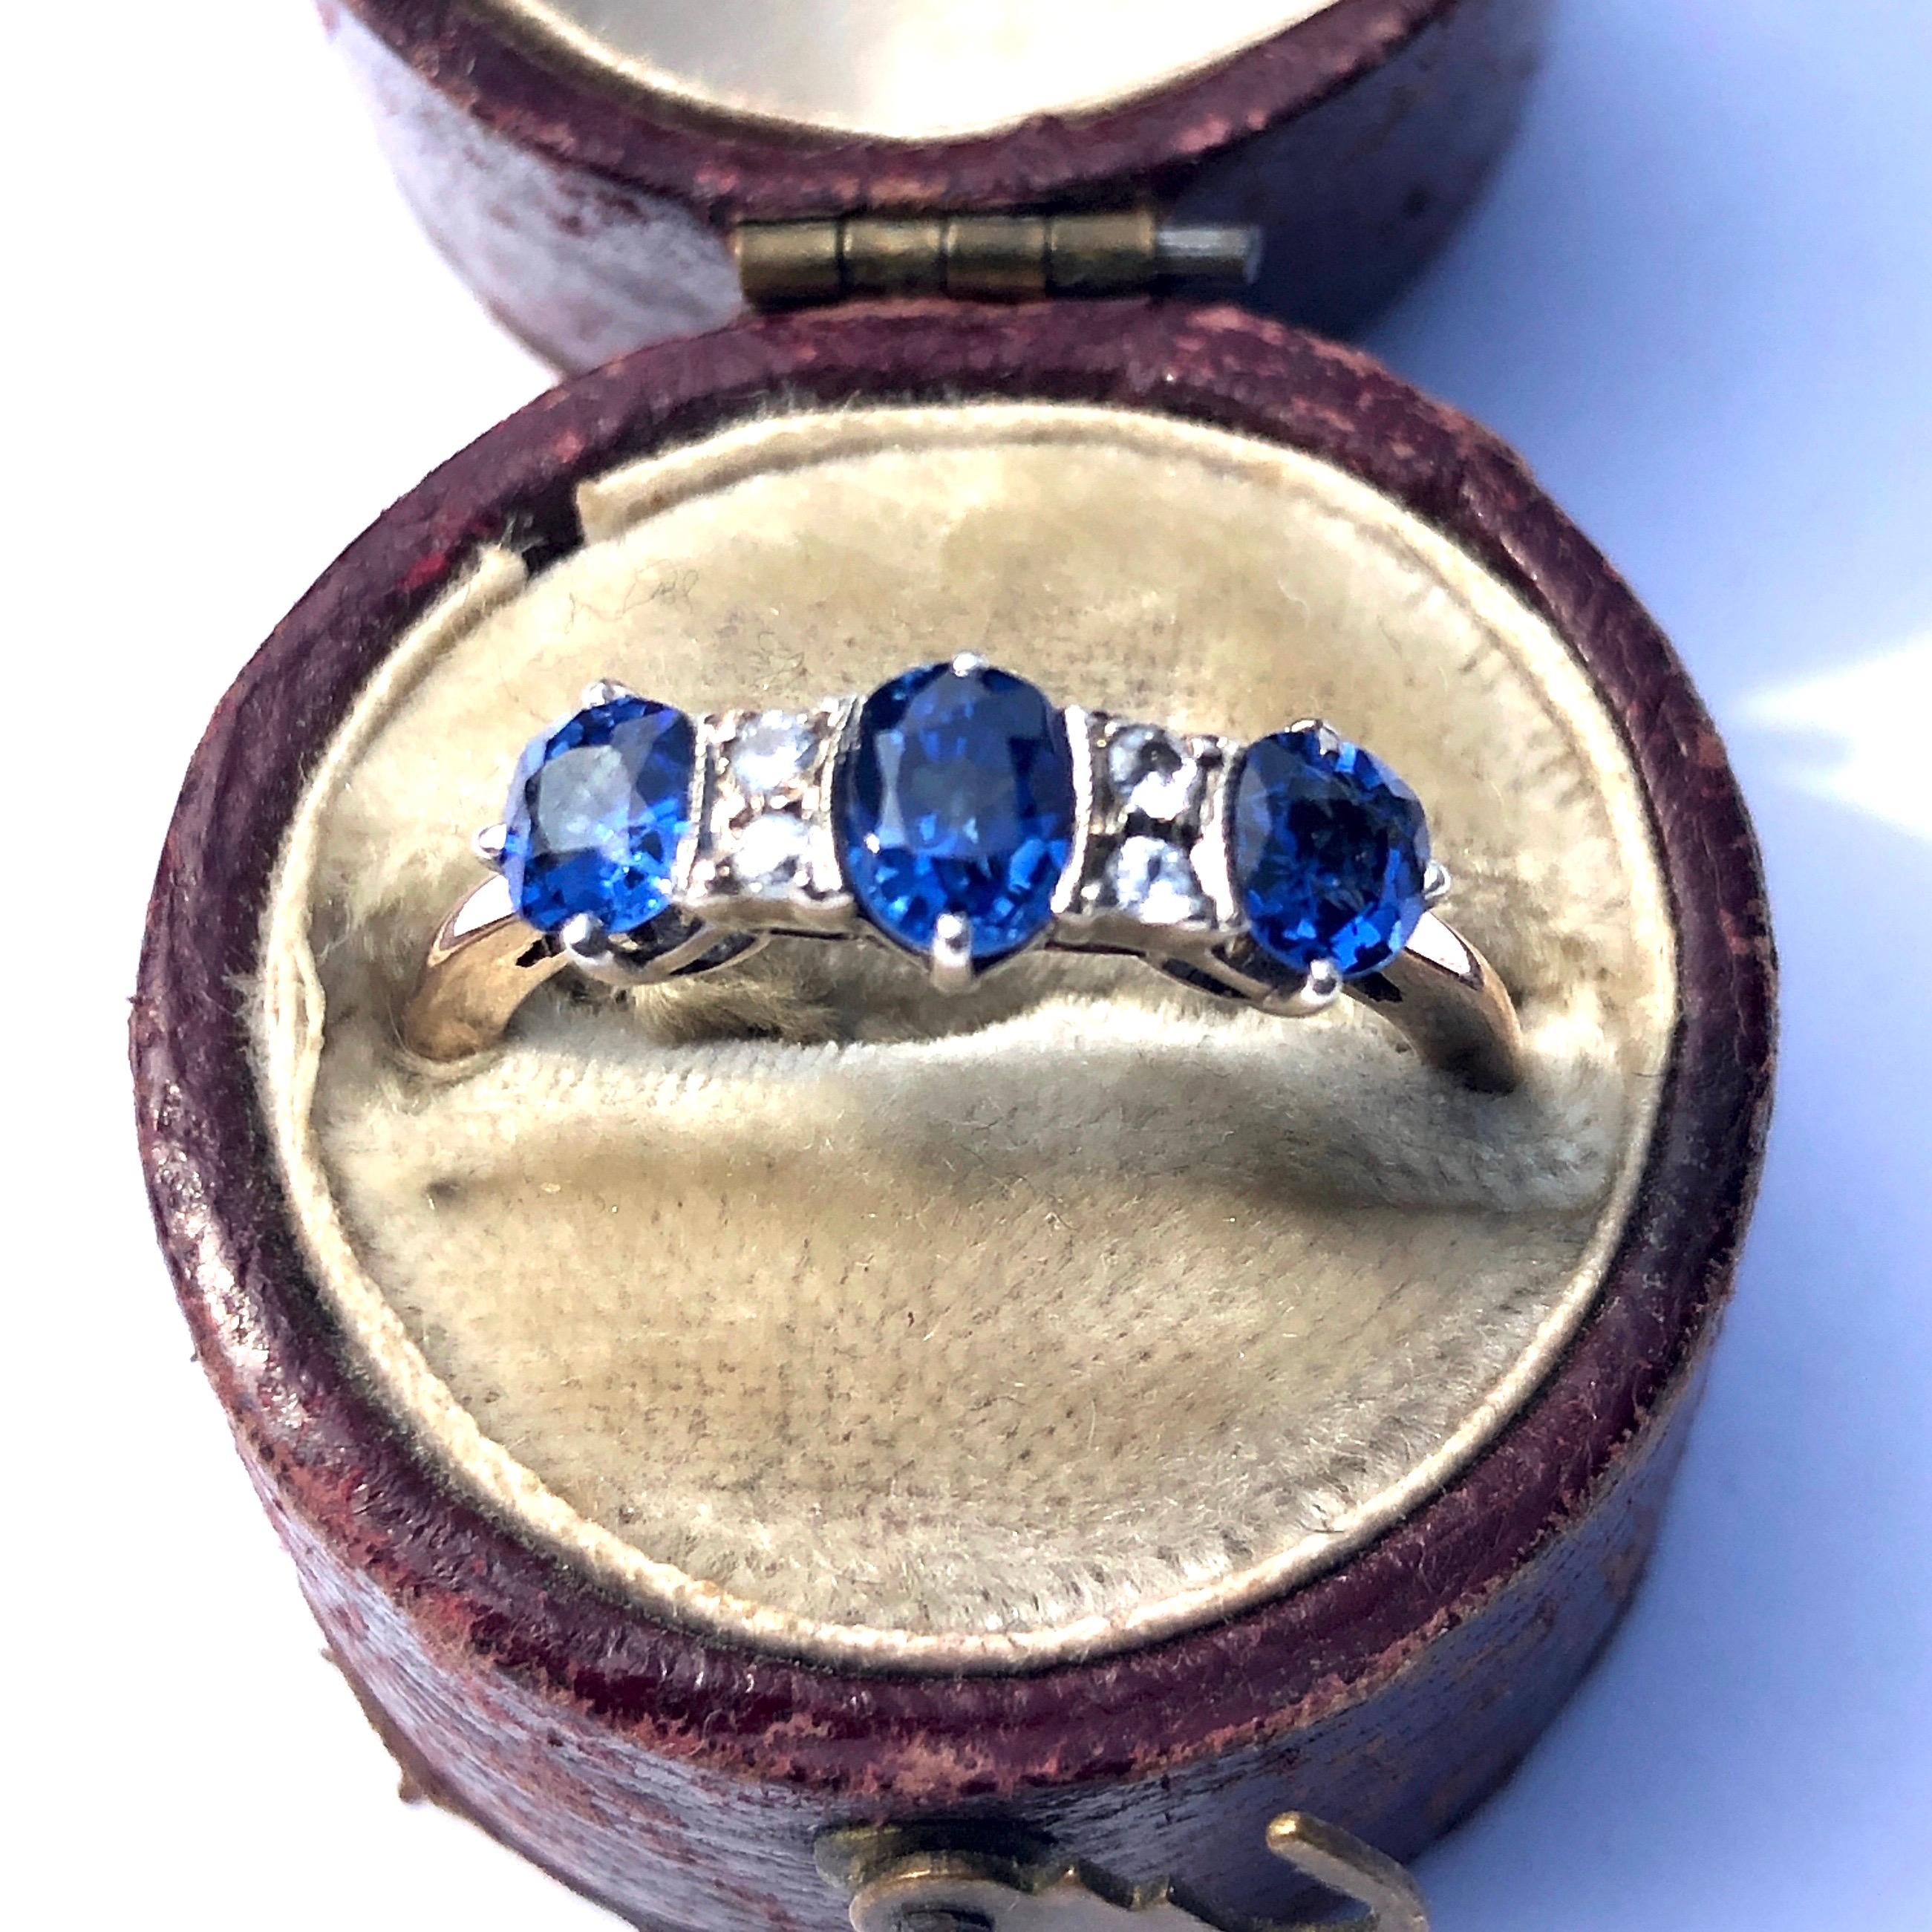 The sapphires in this ring are an eye-catching bight blue colour with a wonderful shimmer them. The total to approximately 1ct and the central stone has two pairs of white sapphires either side. The 9ct gold setting is very subtle which lets the